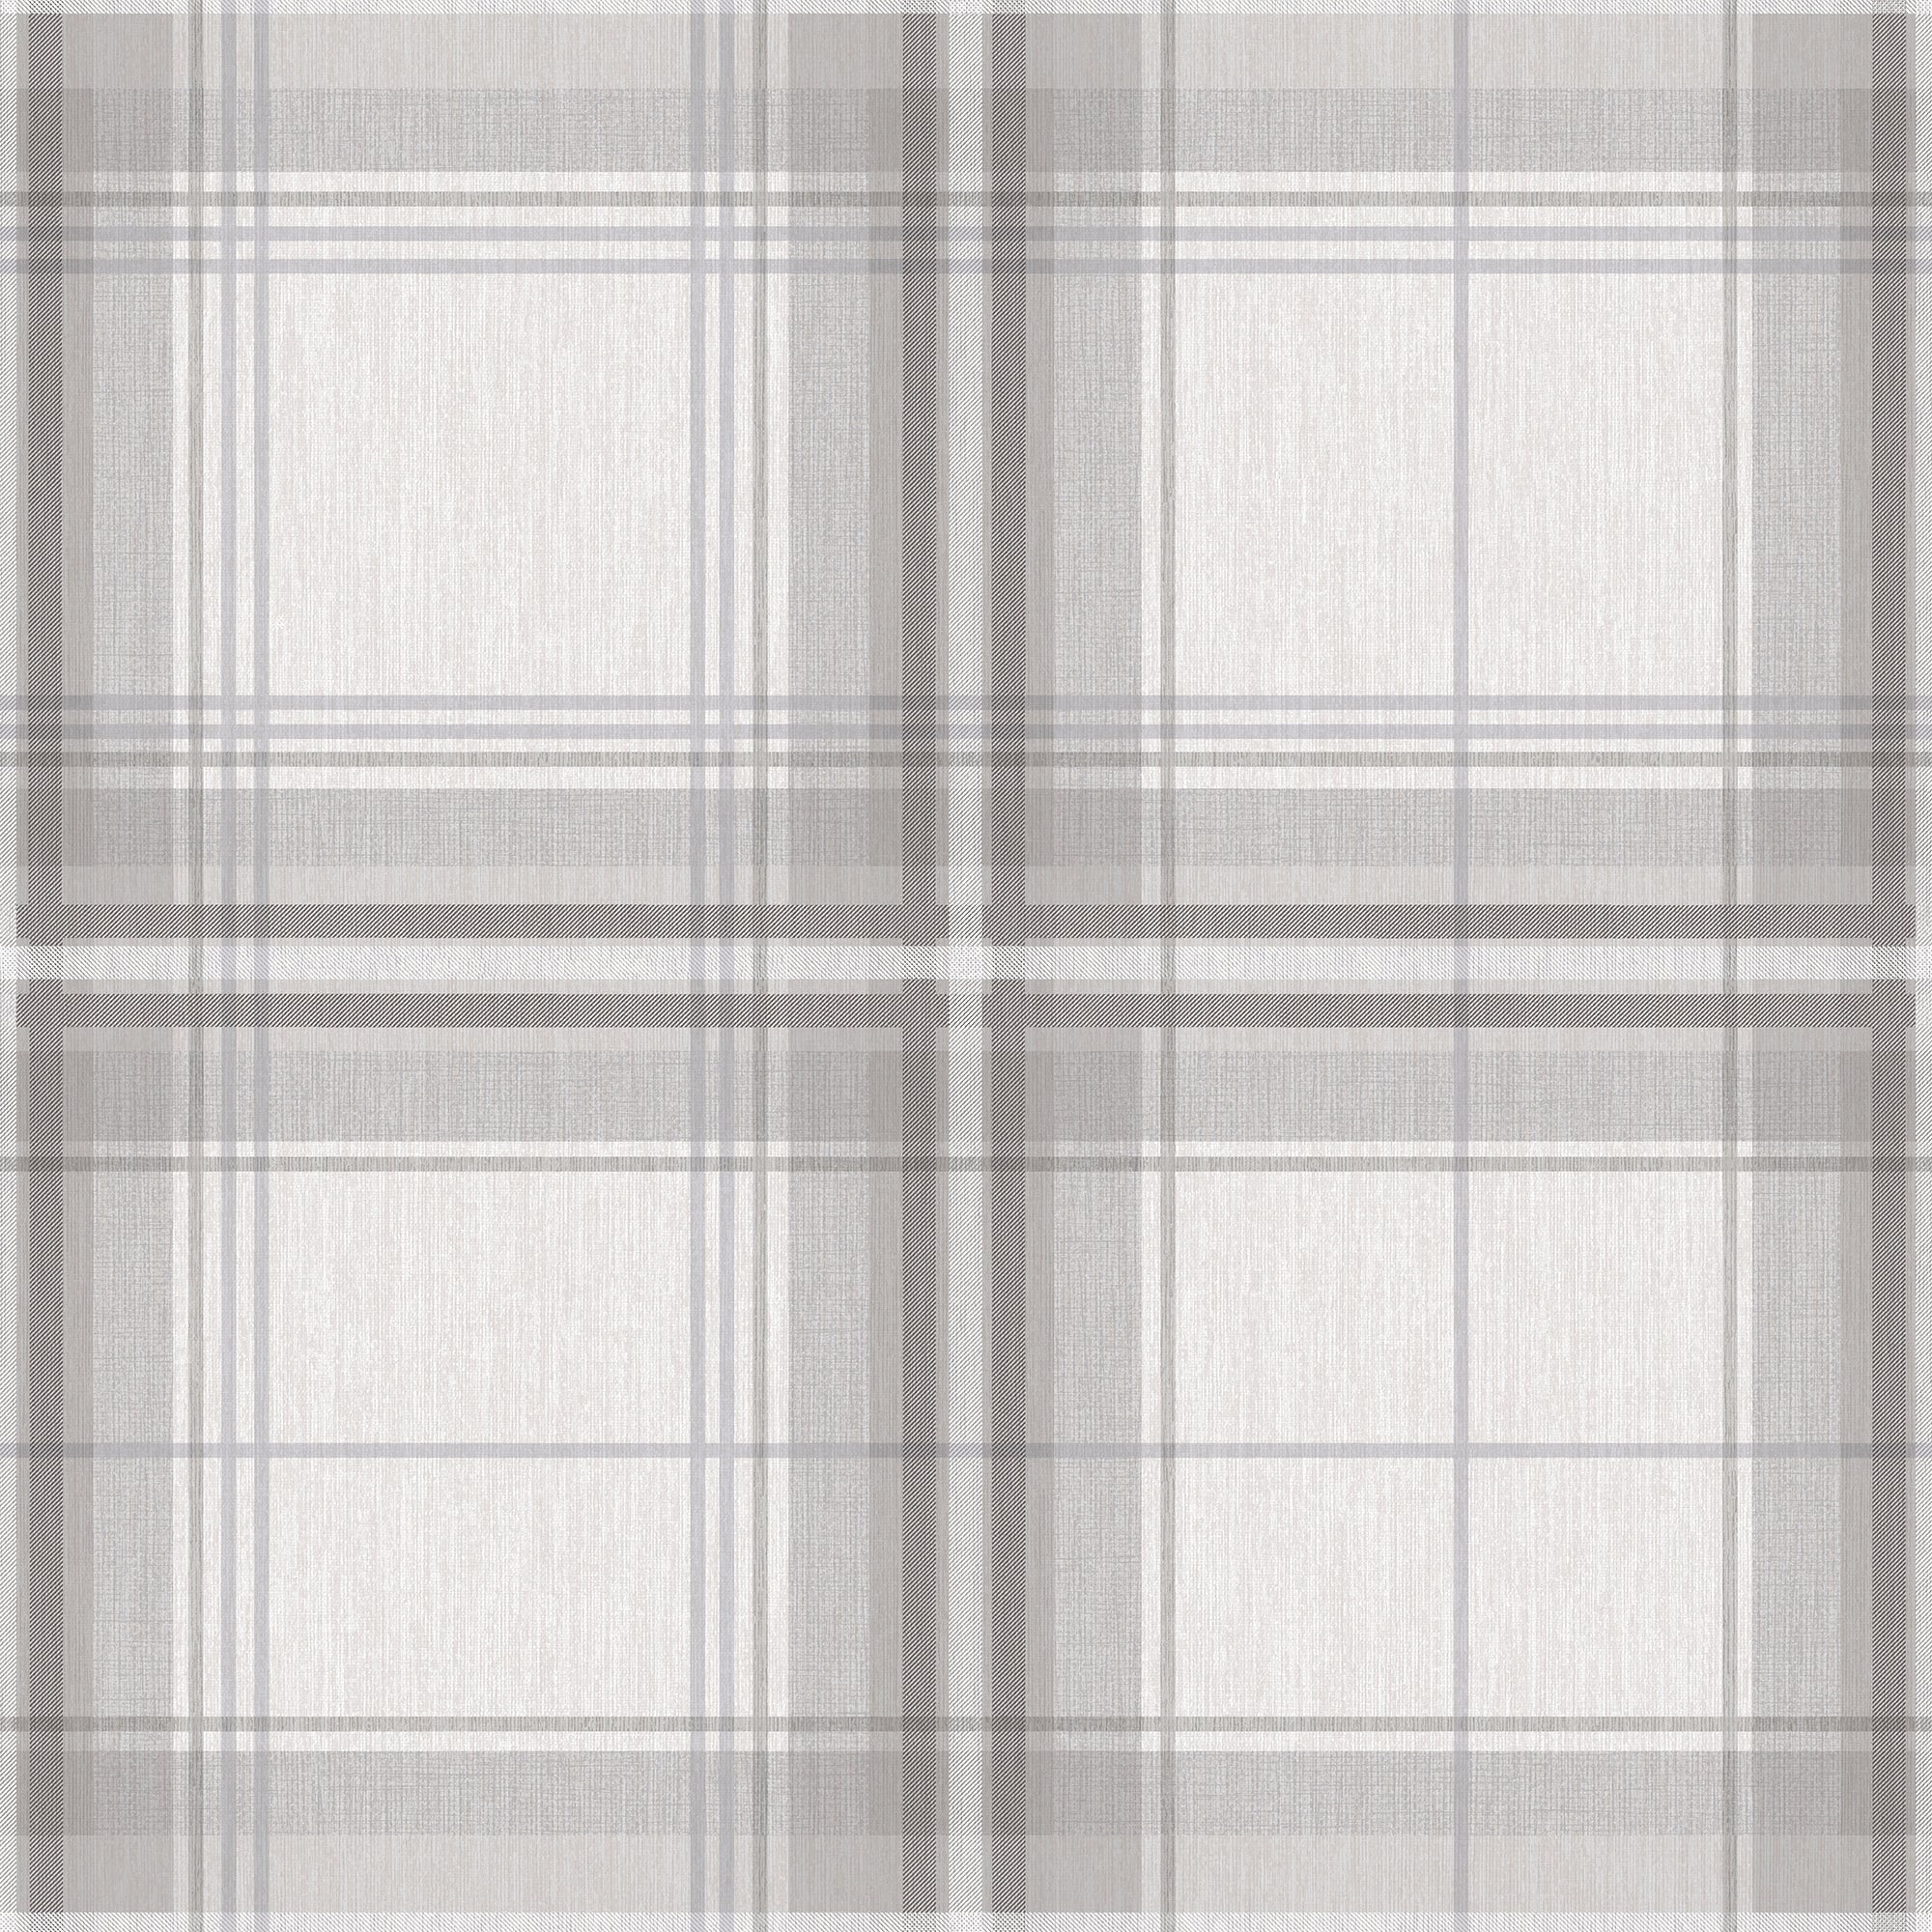 Woven Check Wallpaper 903102 by Arthouse